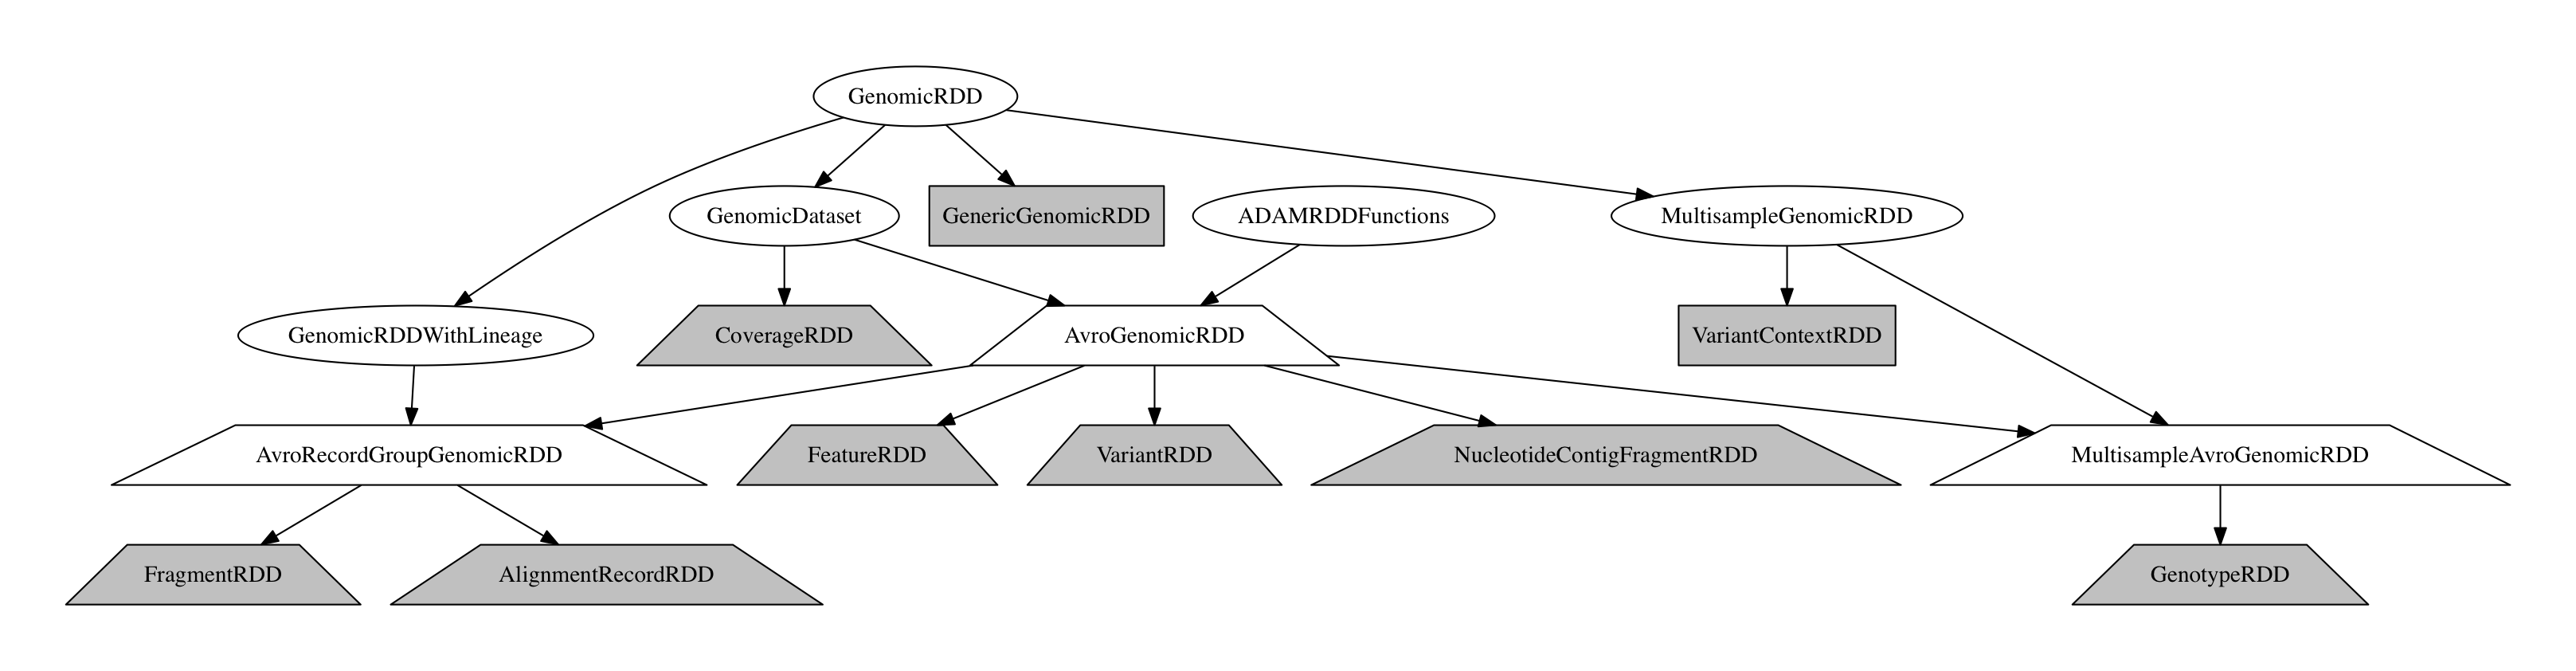 The GenomicDataset Class Hierarchy